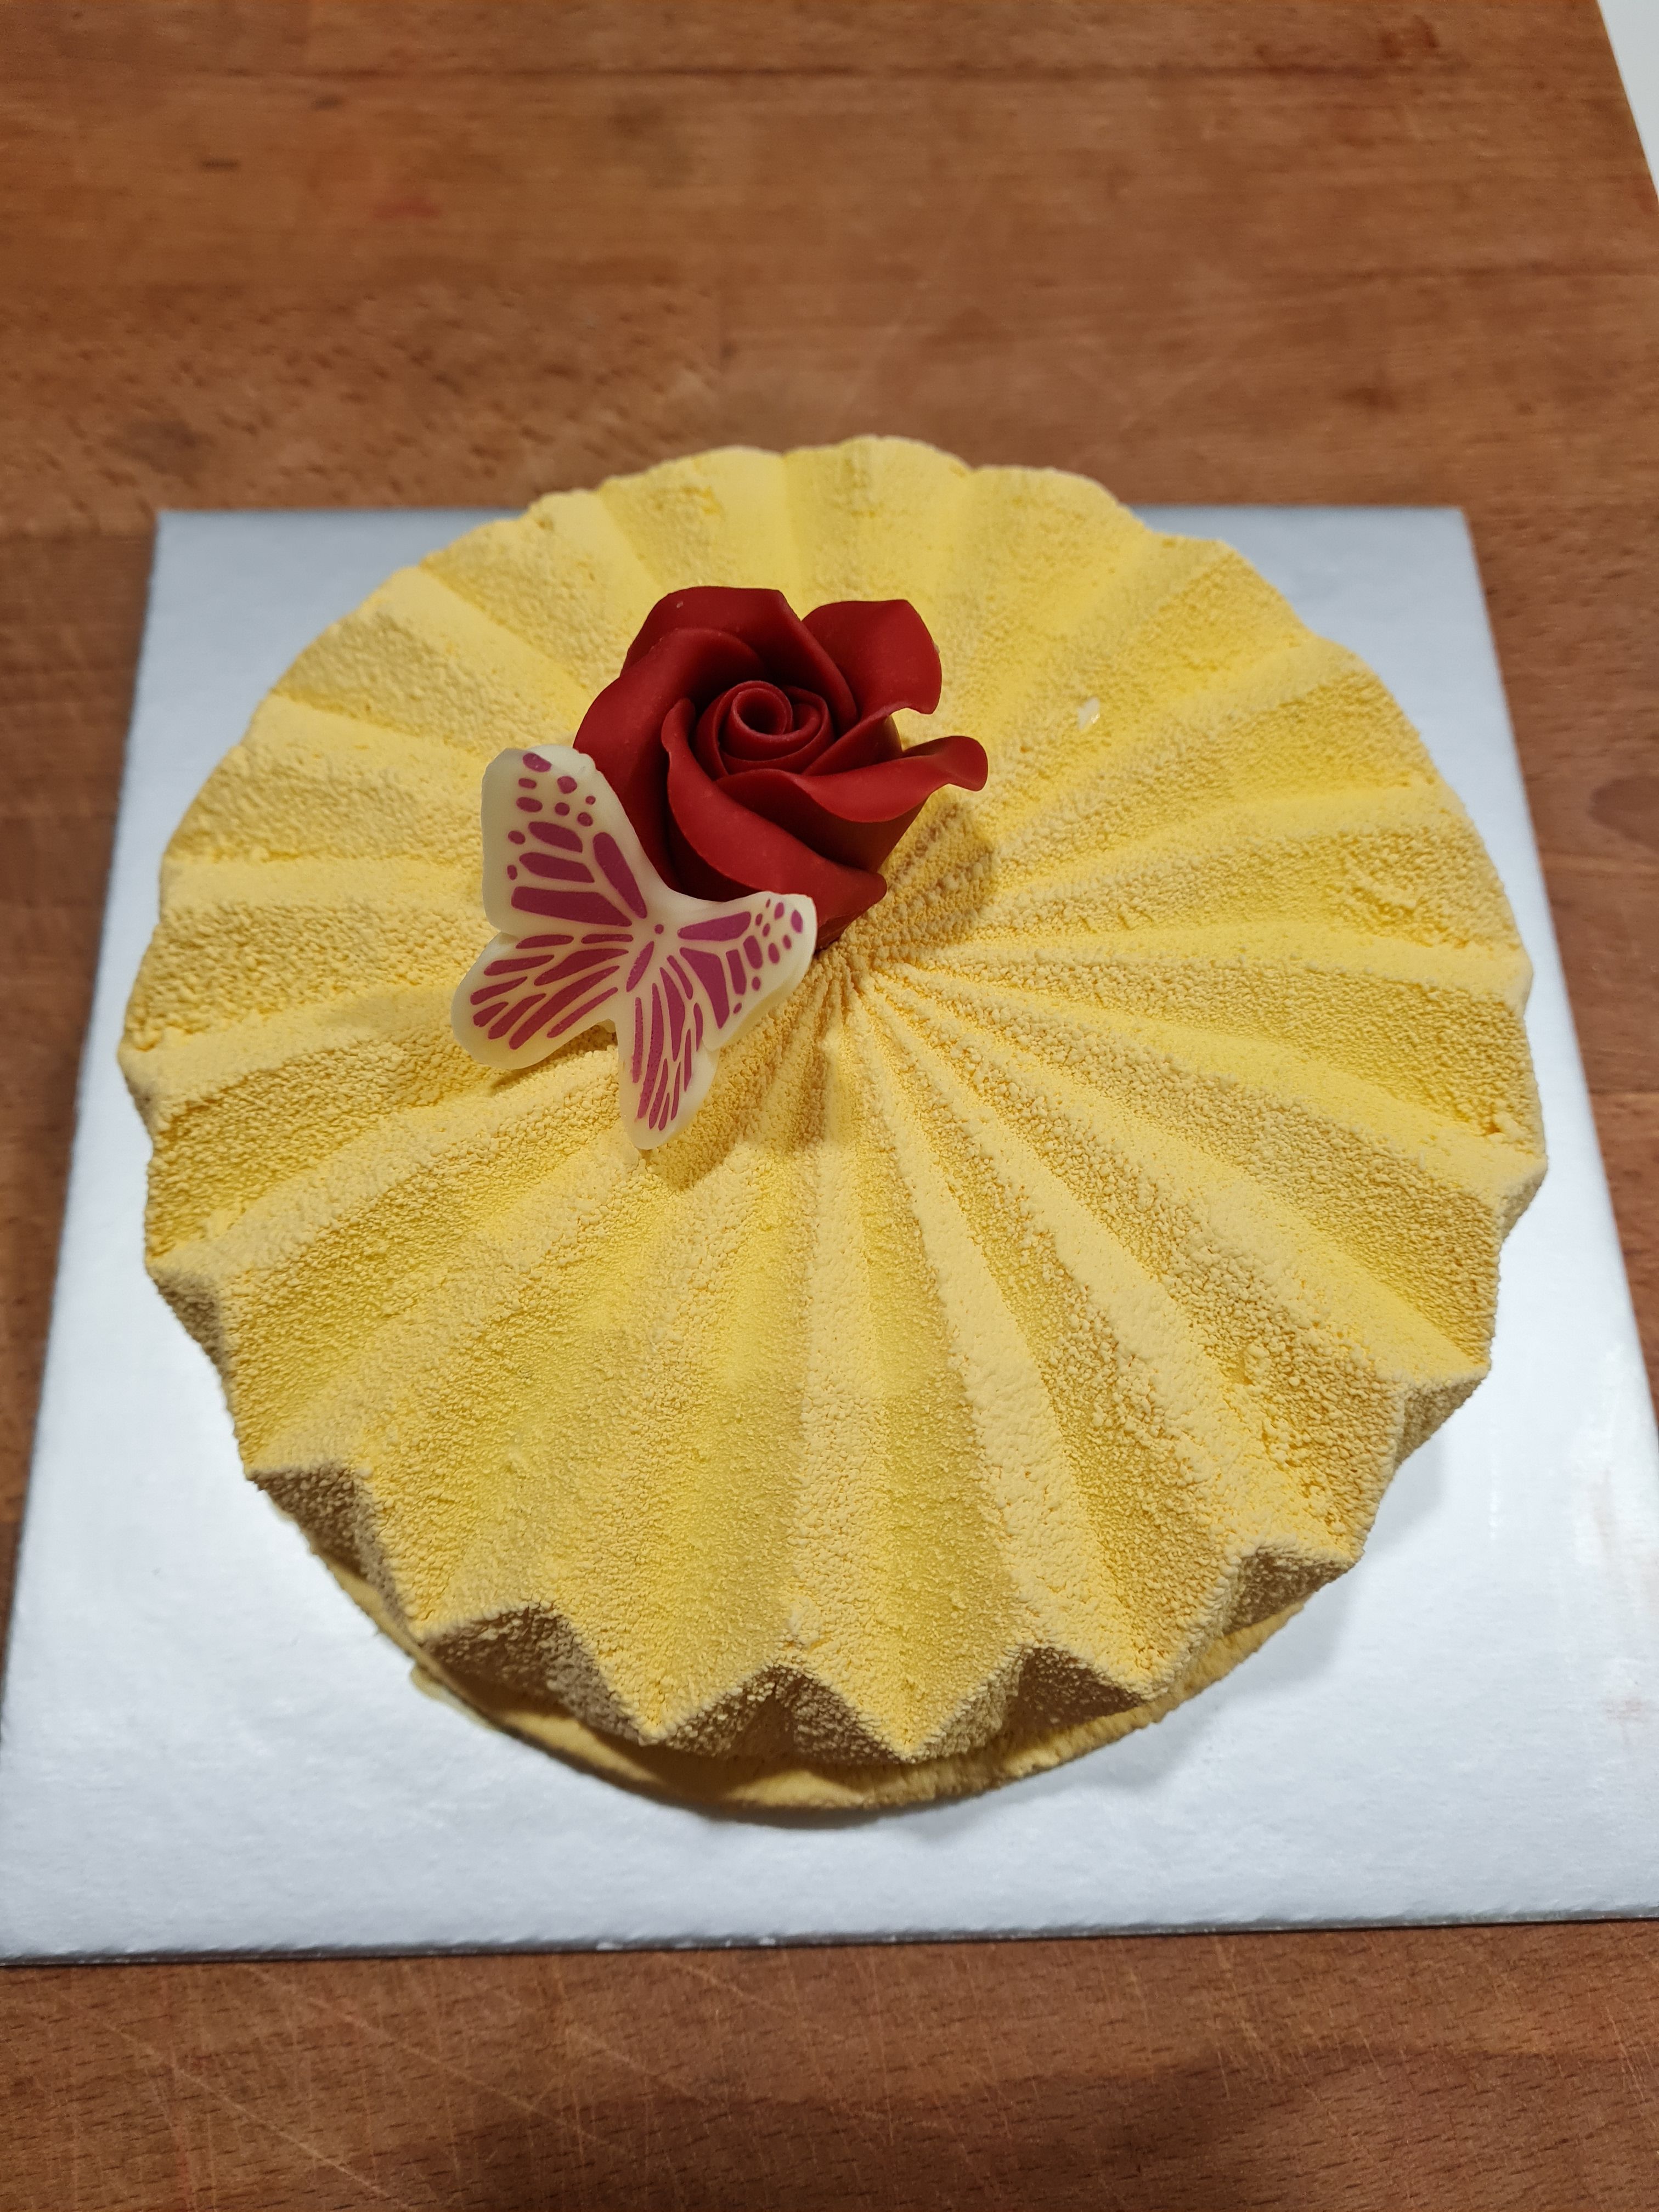 Exotic Star Mouse Cake With Almond Financier Base 100% gluten free